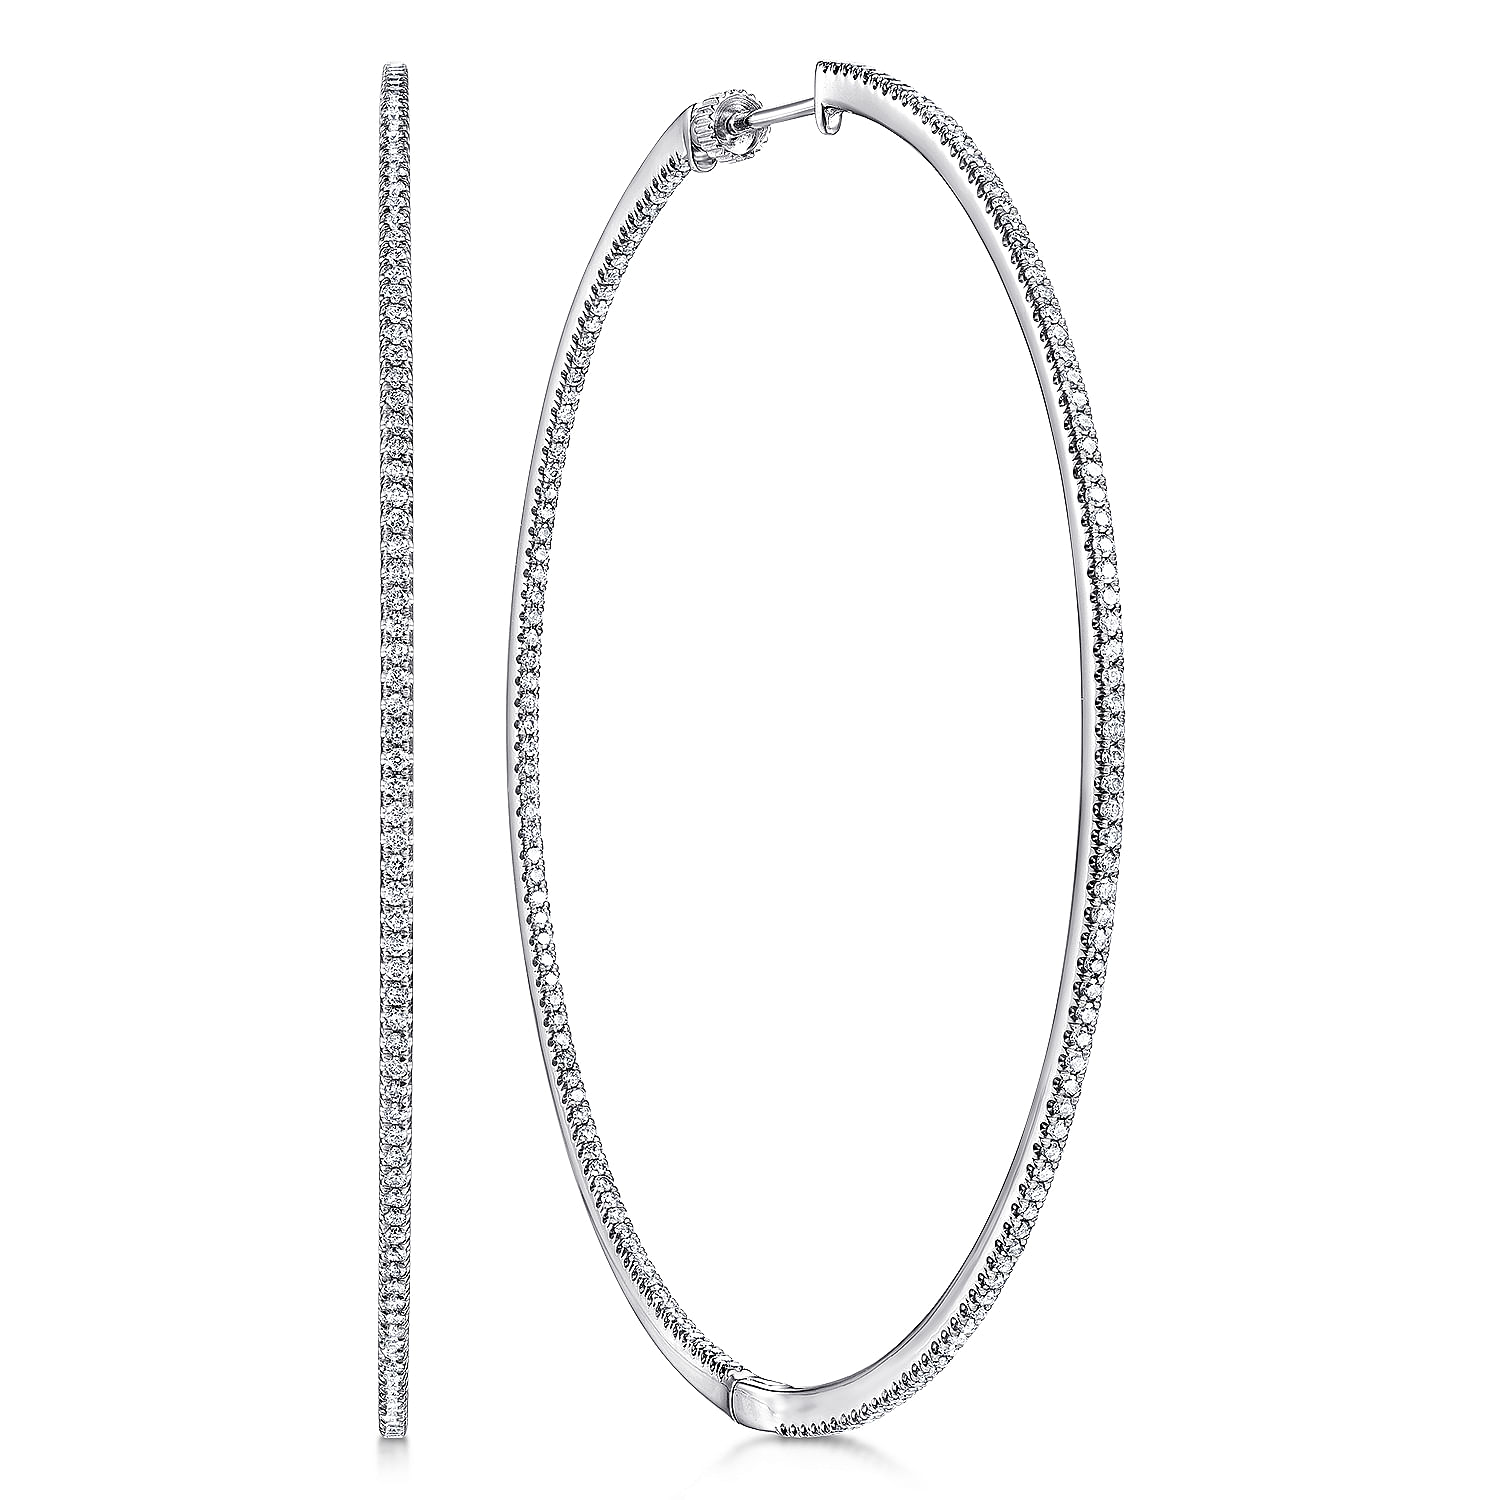 14K White Gold French Pavé 70mm Round Inside Out Diamond Hoop Earrings